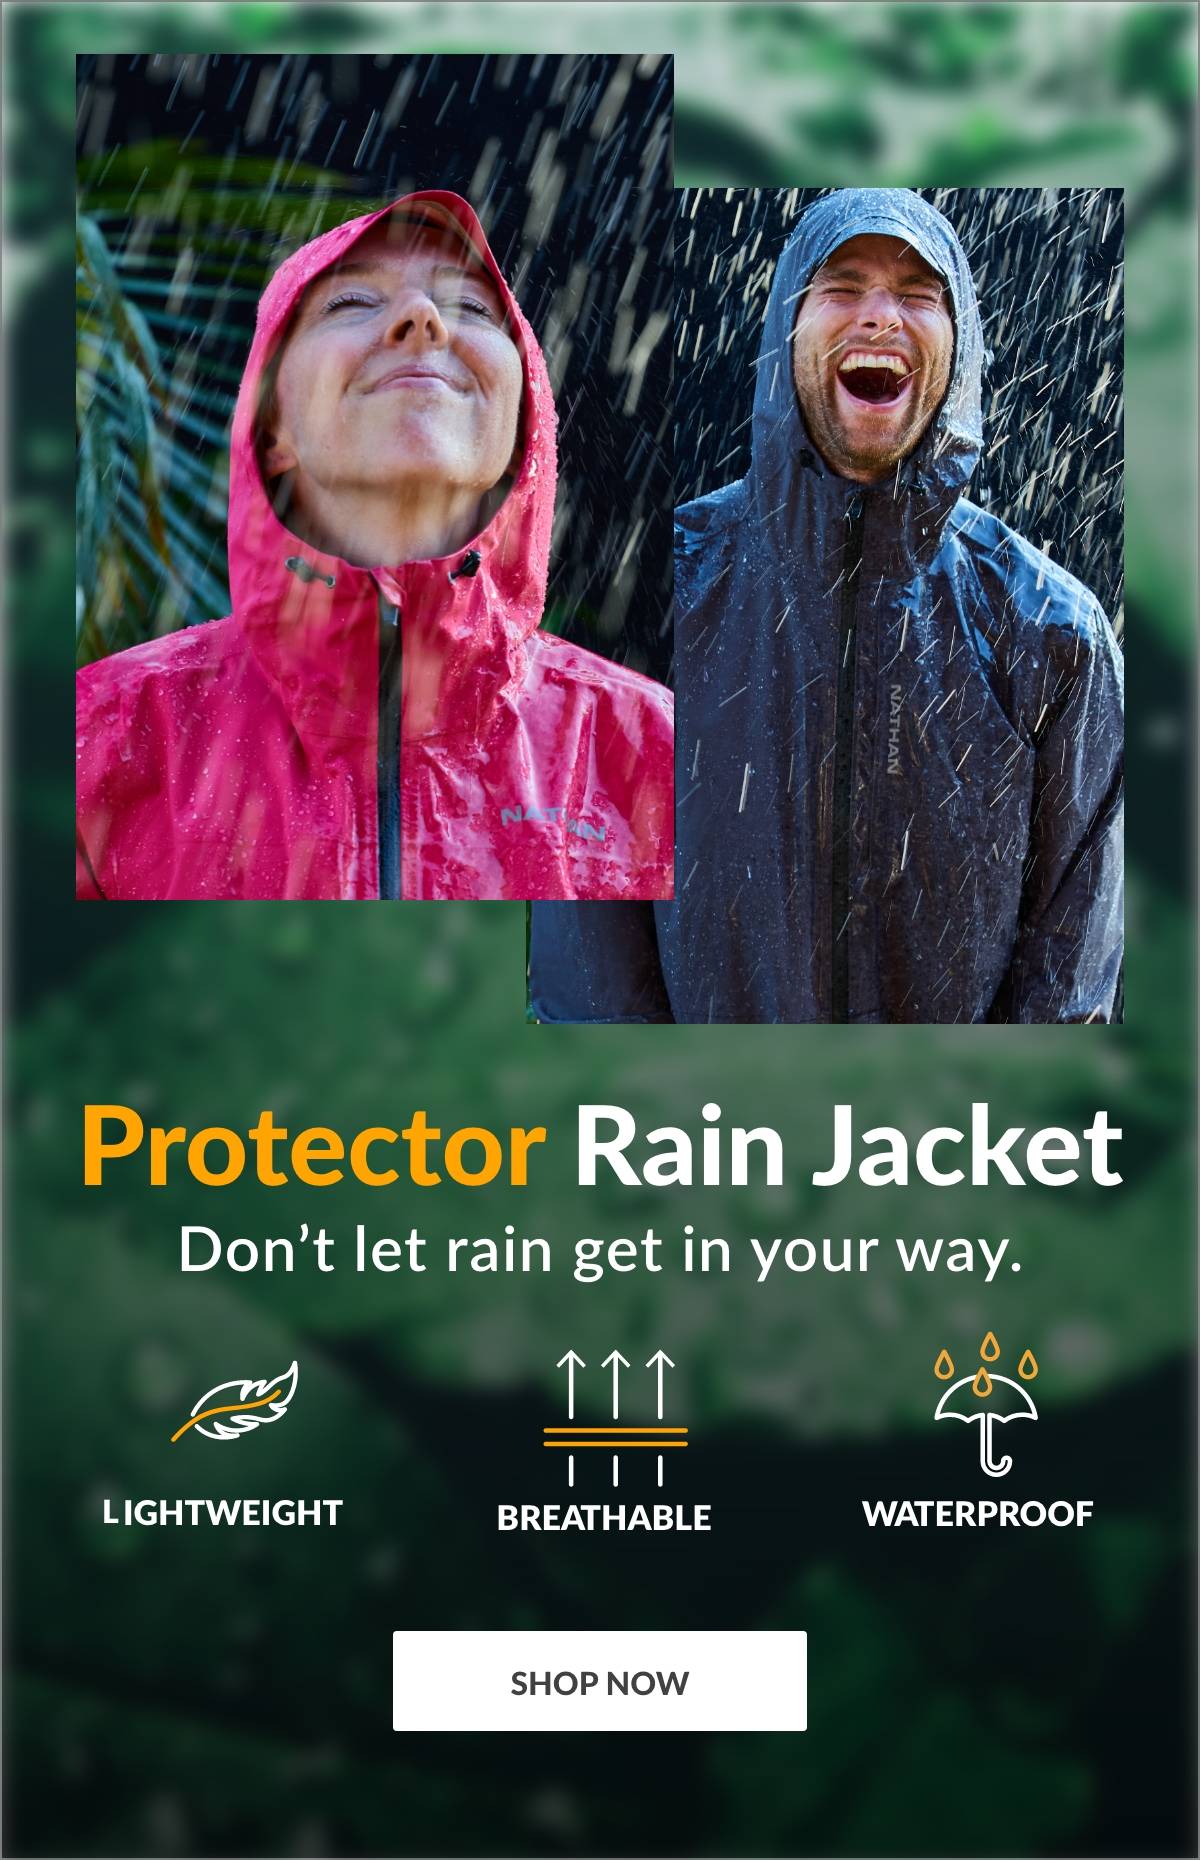 Protector Rain Jacket. Don't let rain get in your way. Lightweight. Breathable. Waterproof. SHOP PROTECTOR